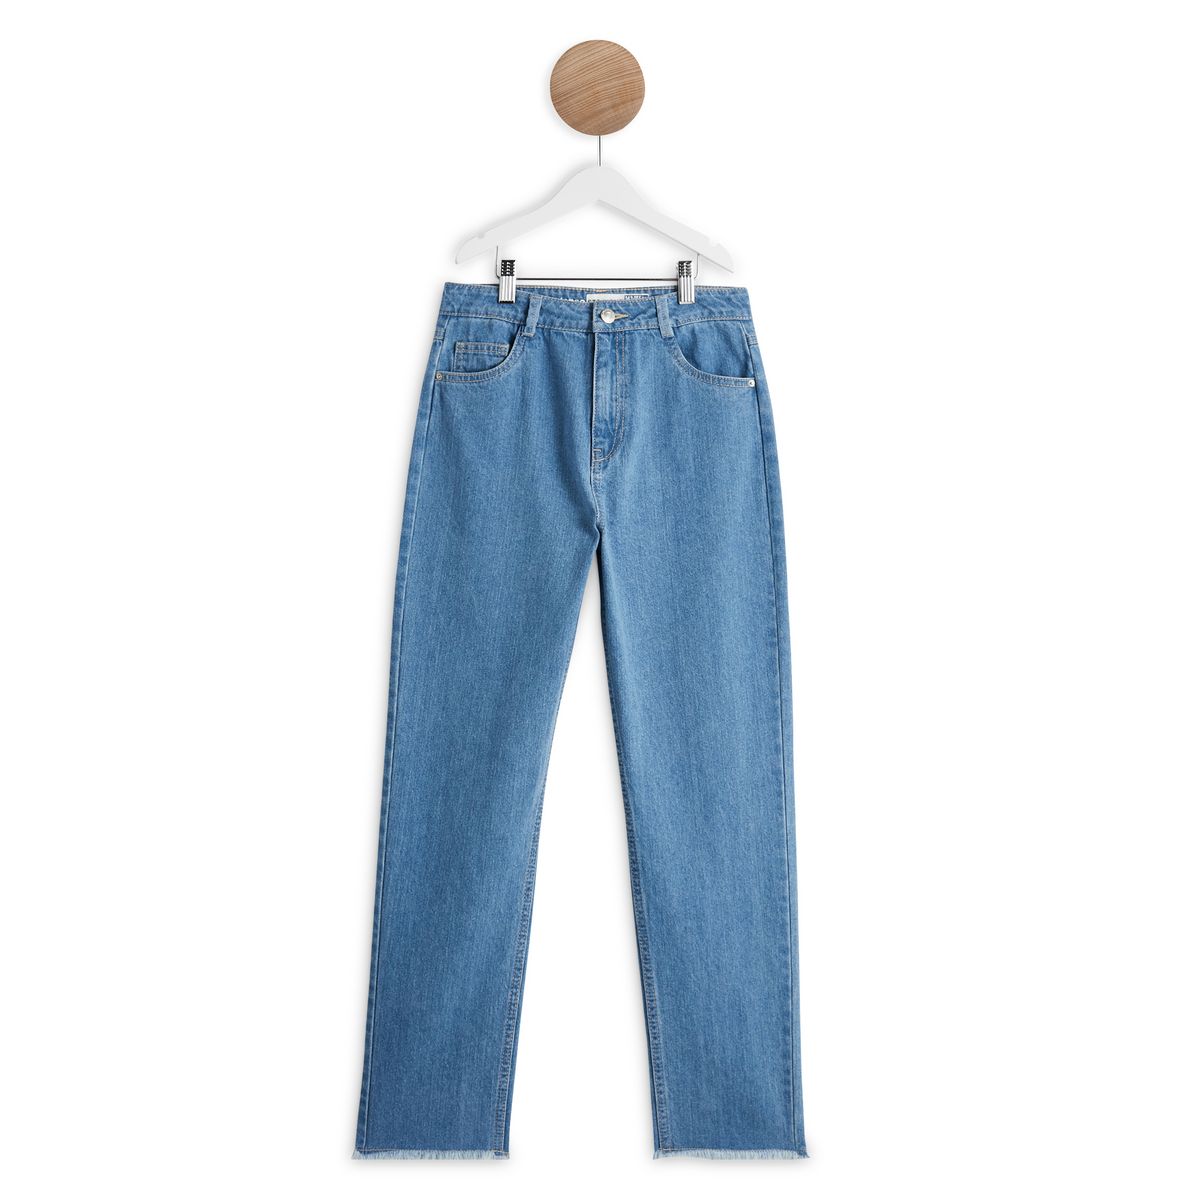 INEXTENSO Jean collection ado fille